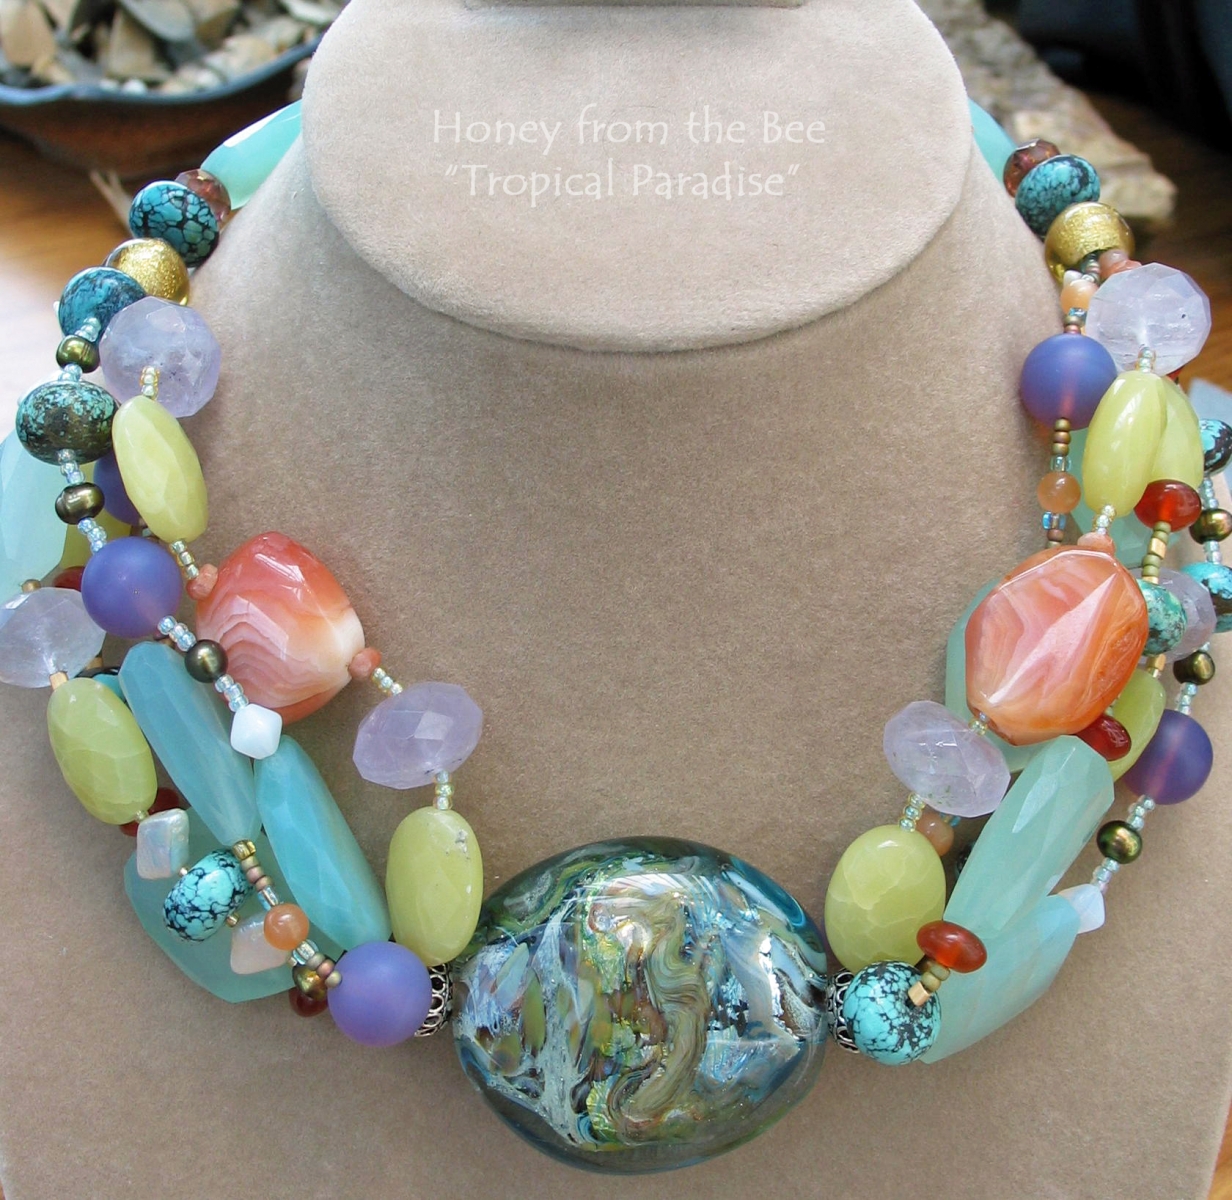 One of a kind statement necklace